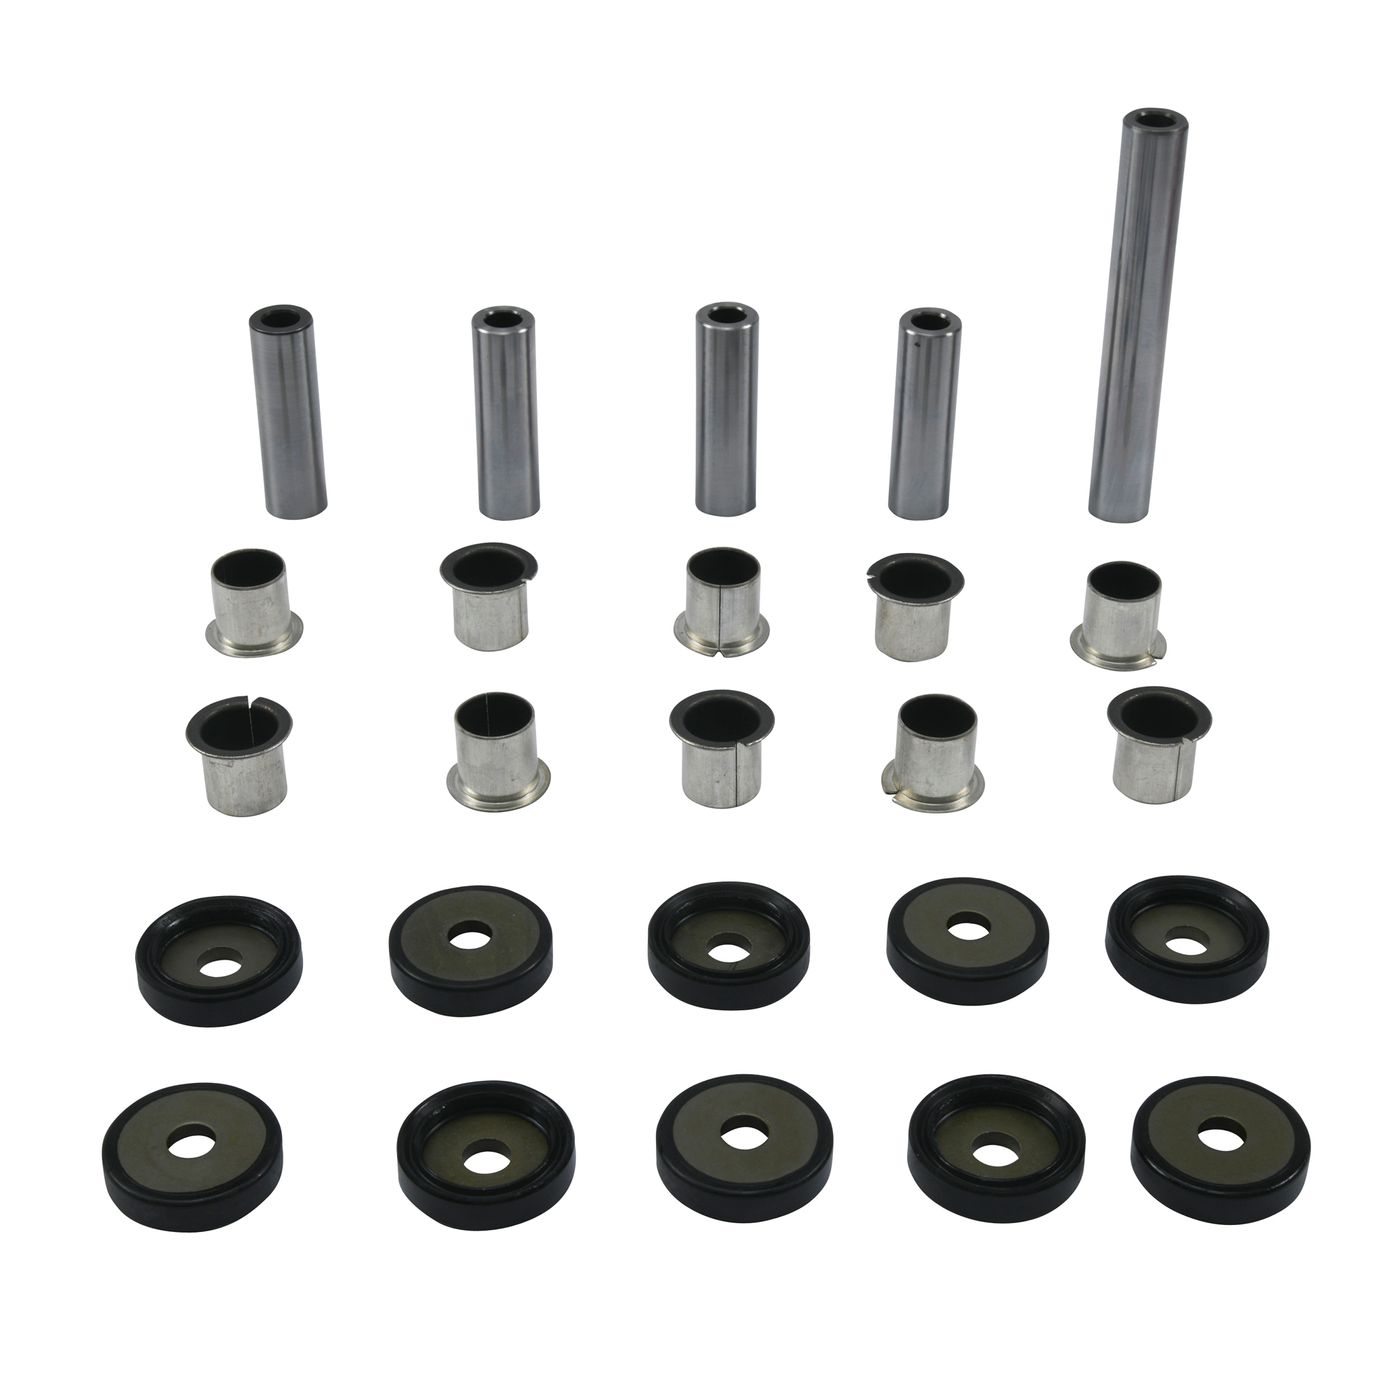 Wrp Rear Ind. Suspension Kits - WRP501159 image